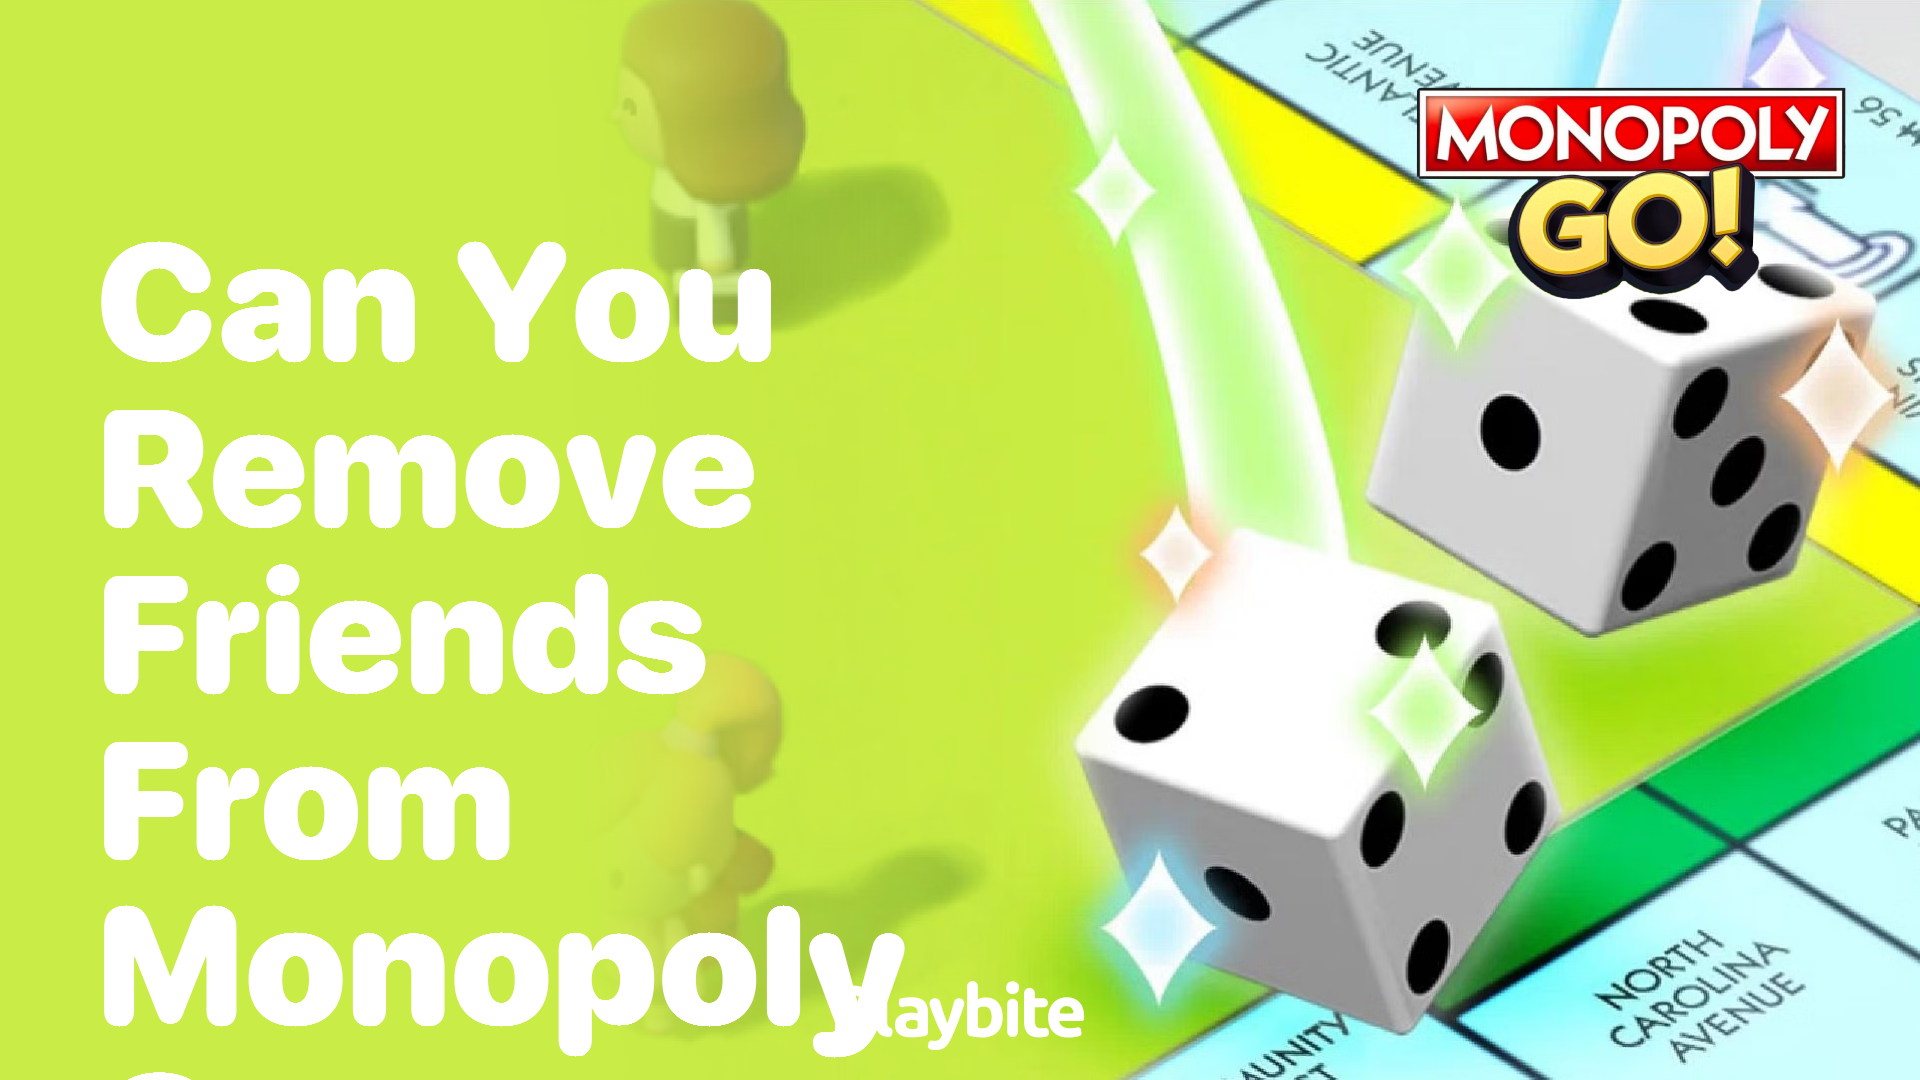 Can You Remove Friends from Monopoly Go? Find Out Here!